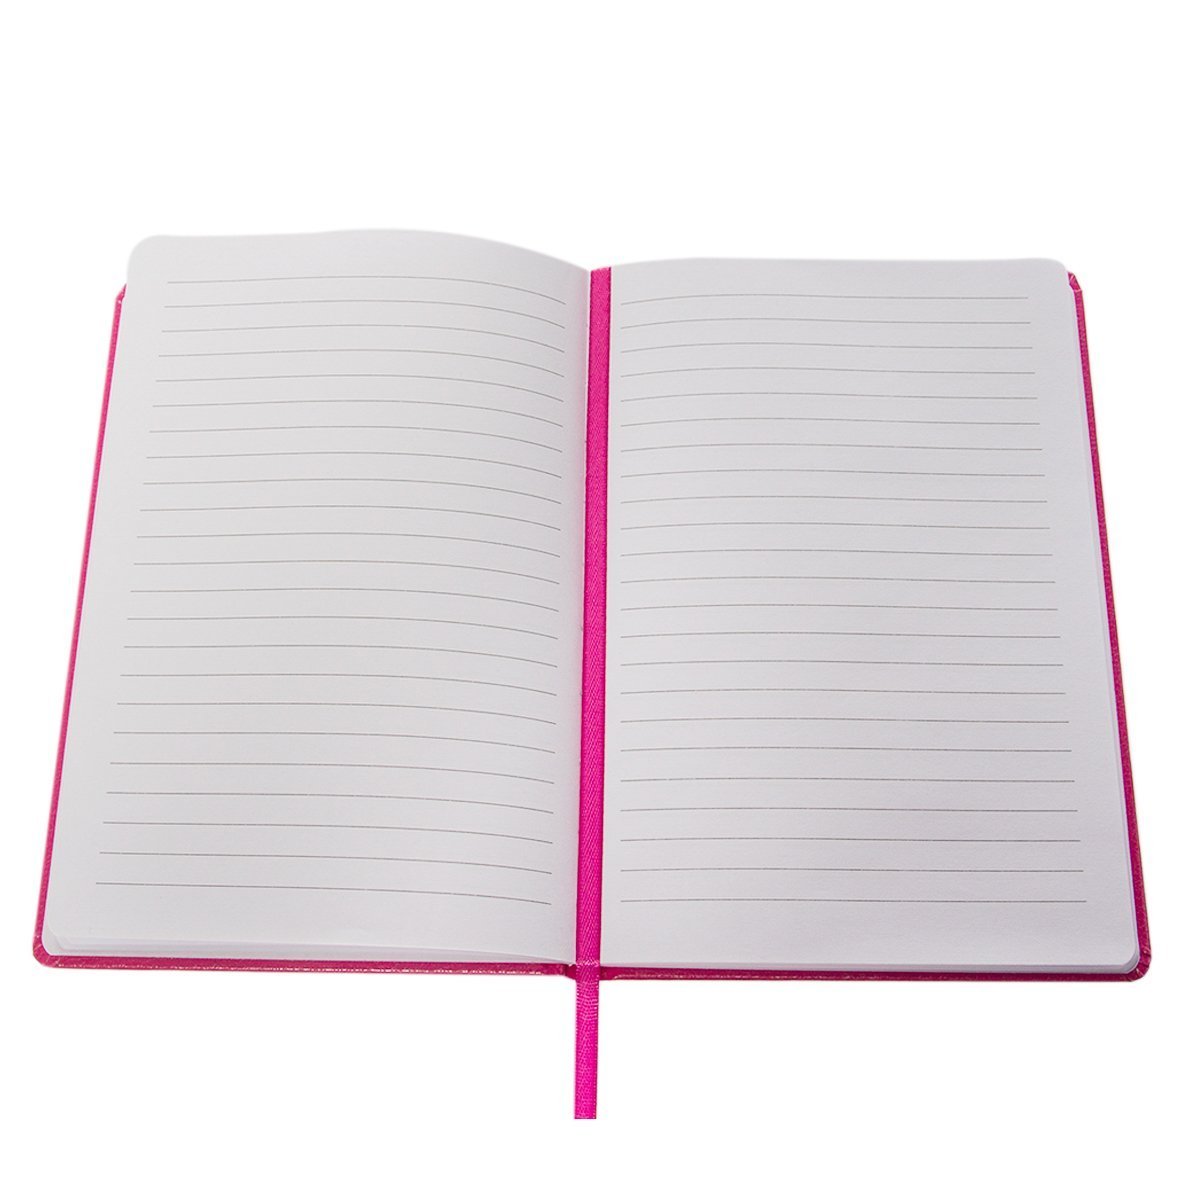 Save on paper craft 4 pack 8 5 x 5 5 leatherette lined writing journals wide ruled banded notebook with ribbon bookmark pink a5 size